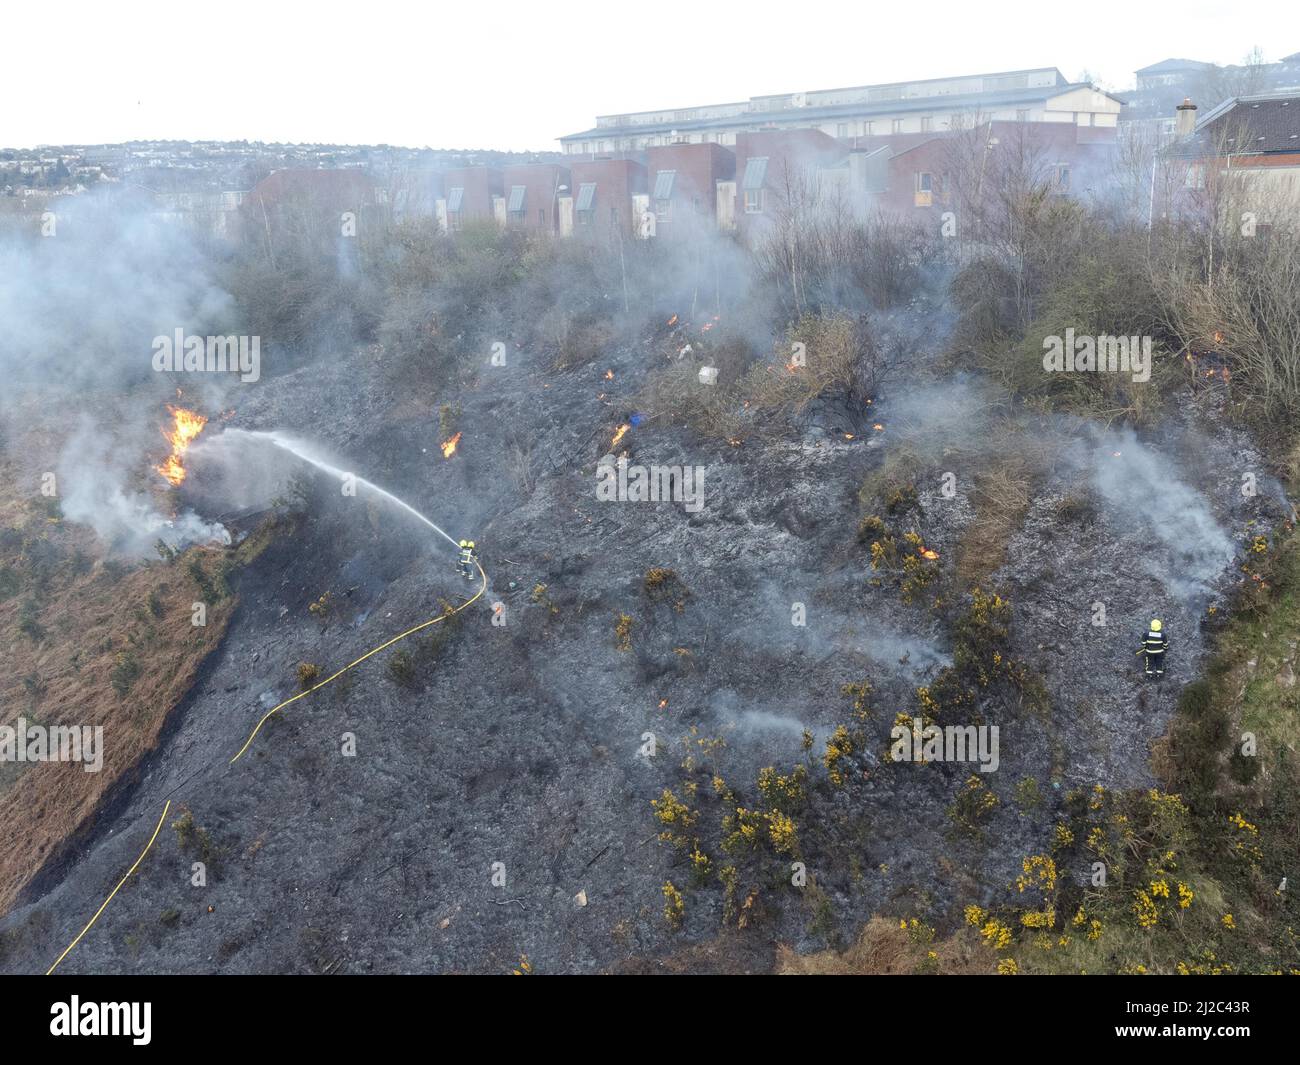 Cork, Ireland, 31st March 2022. Cork City Fire Brigade Deals with a Large Gorse Fire Near Houses in the Glen Park, Cork, Ireland. Aerial photo of members of the Cork City Fire Brigade dealing with another large gorse fire burning close to houses in the Glen River Park which runs between the Glen and Ballyvolane. Shortly after 6 pm this evening Cork City Fire Brigade attended the scene of a large gorse fire burning close to houses in Glen River Park, the smoke from this fire blew directly into the houses in the Glen area above Glen Park. A number of firefighters could be seen attending th Stock Photo